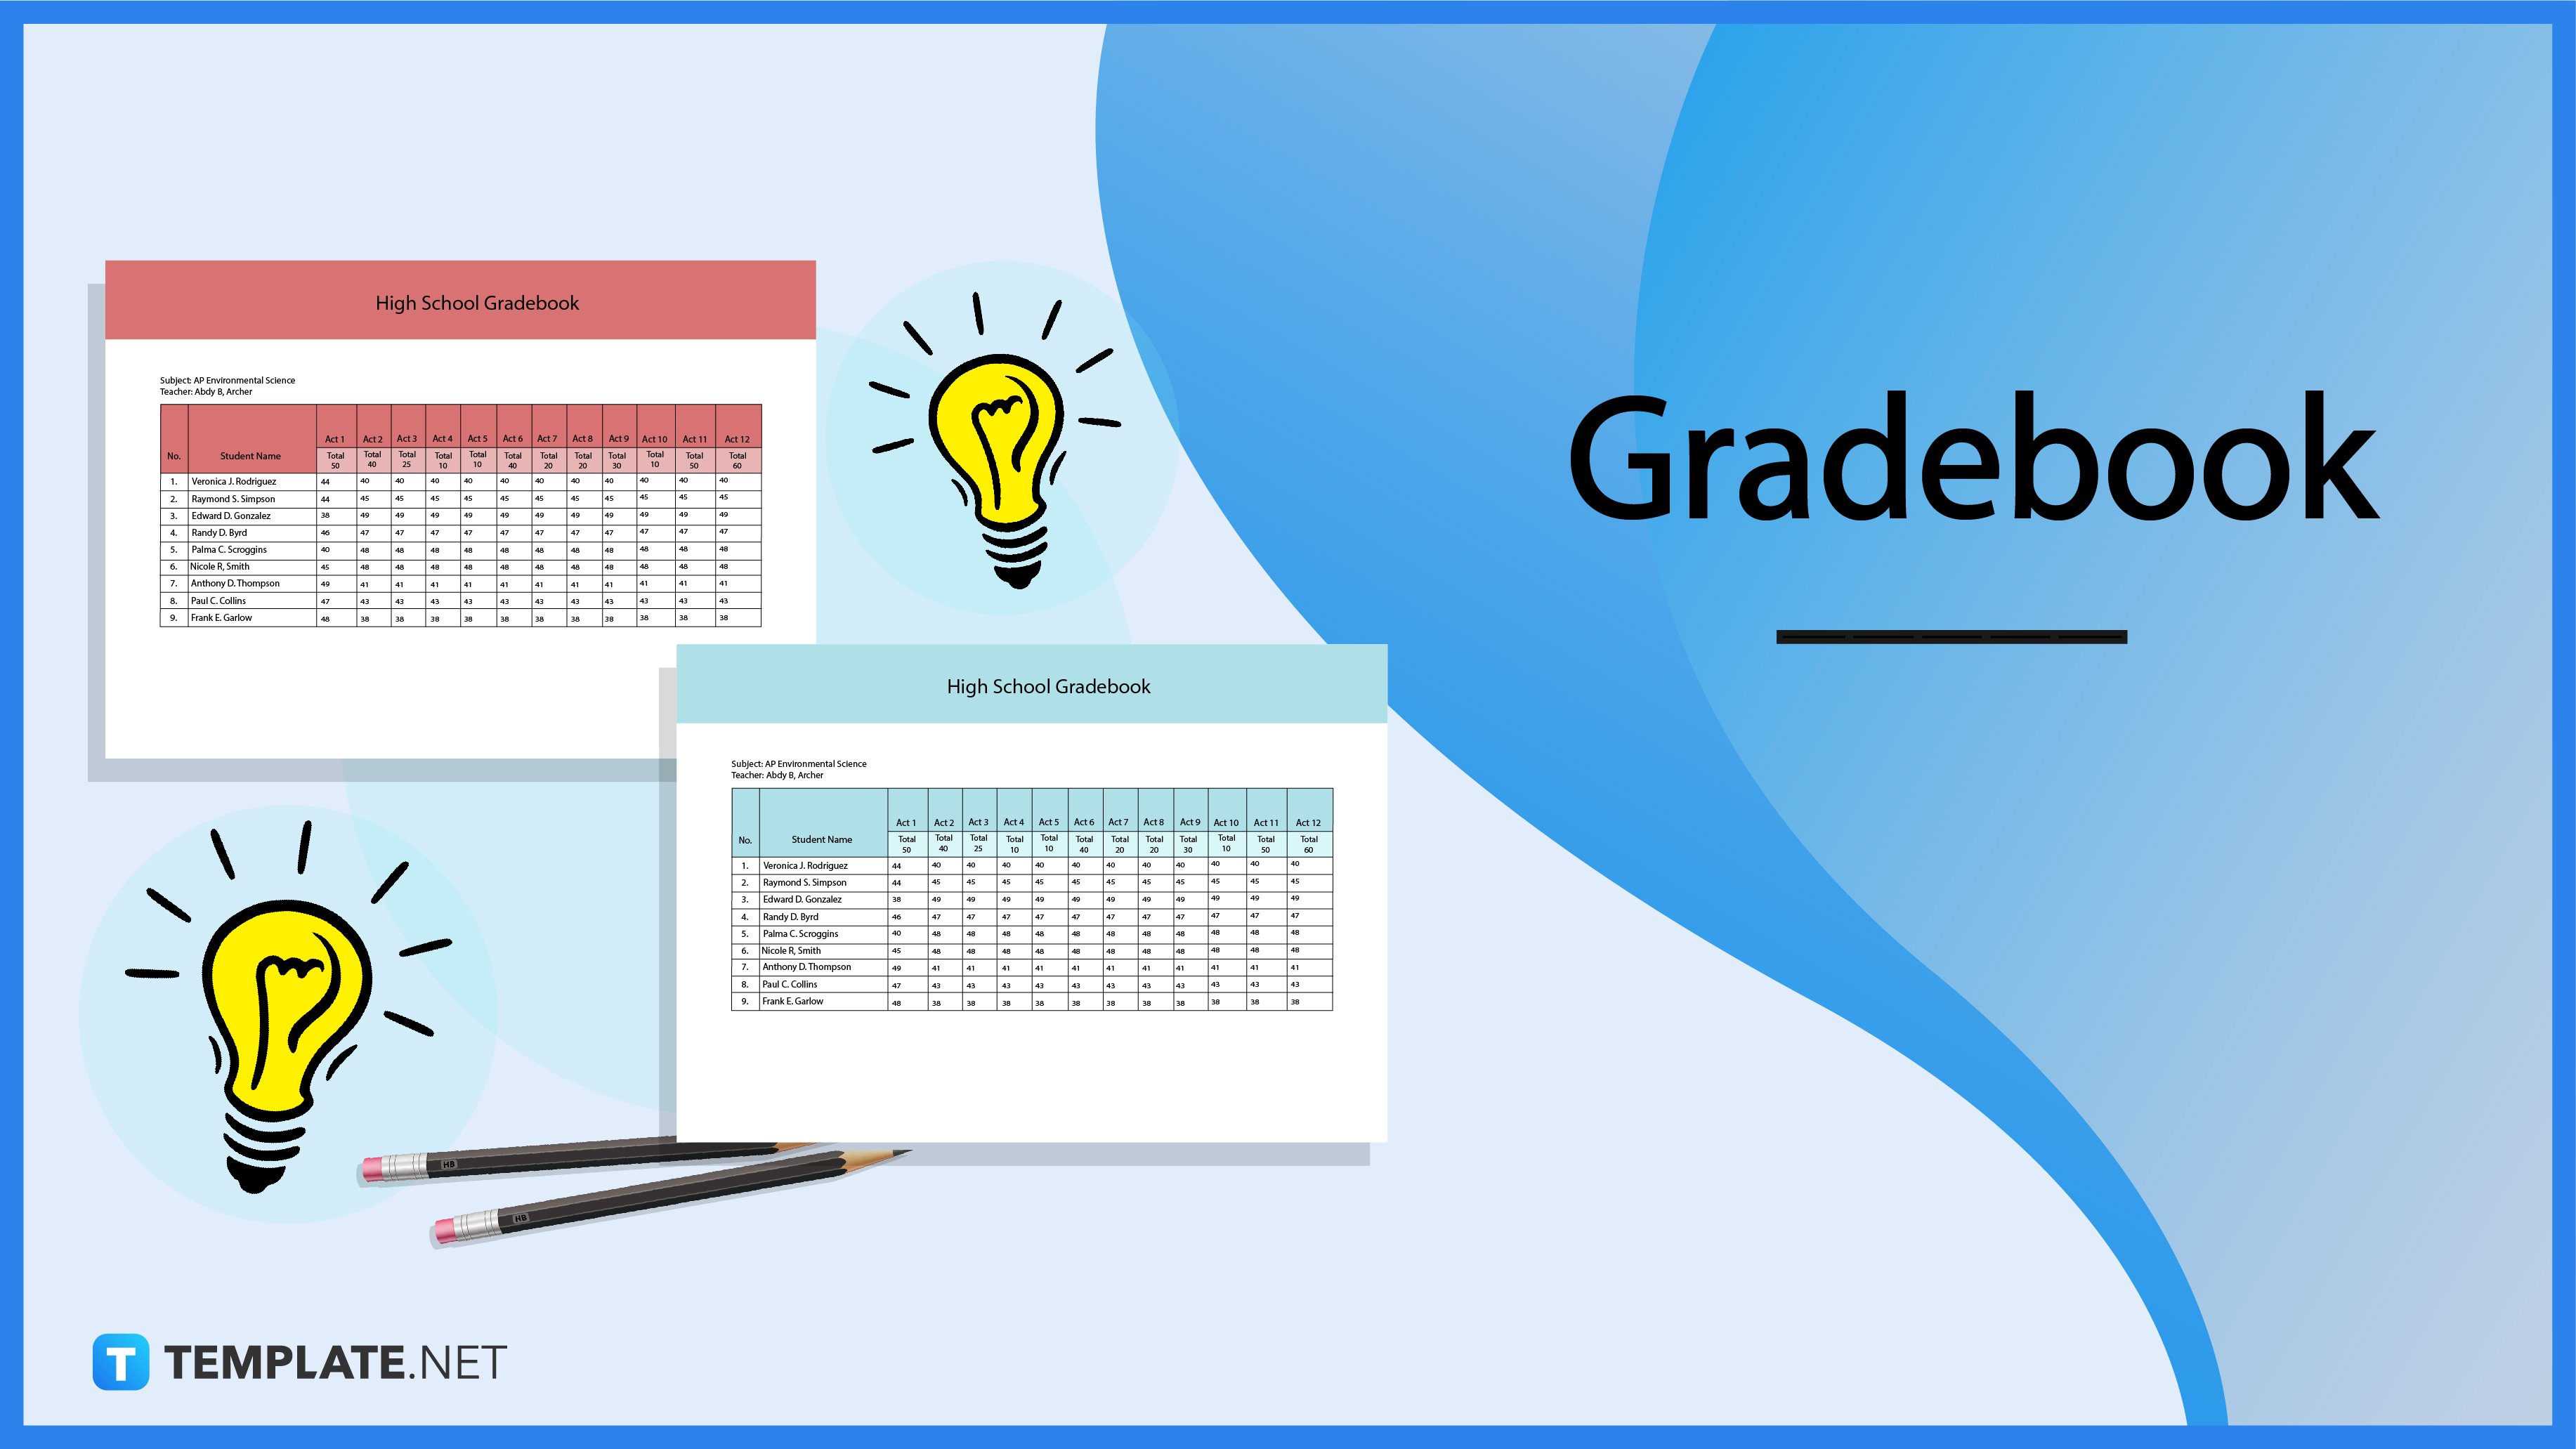 Is There A Gradebook In Google Classroom